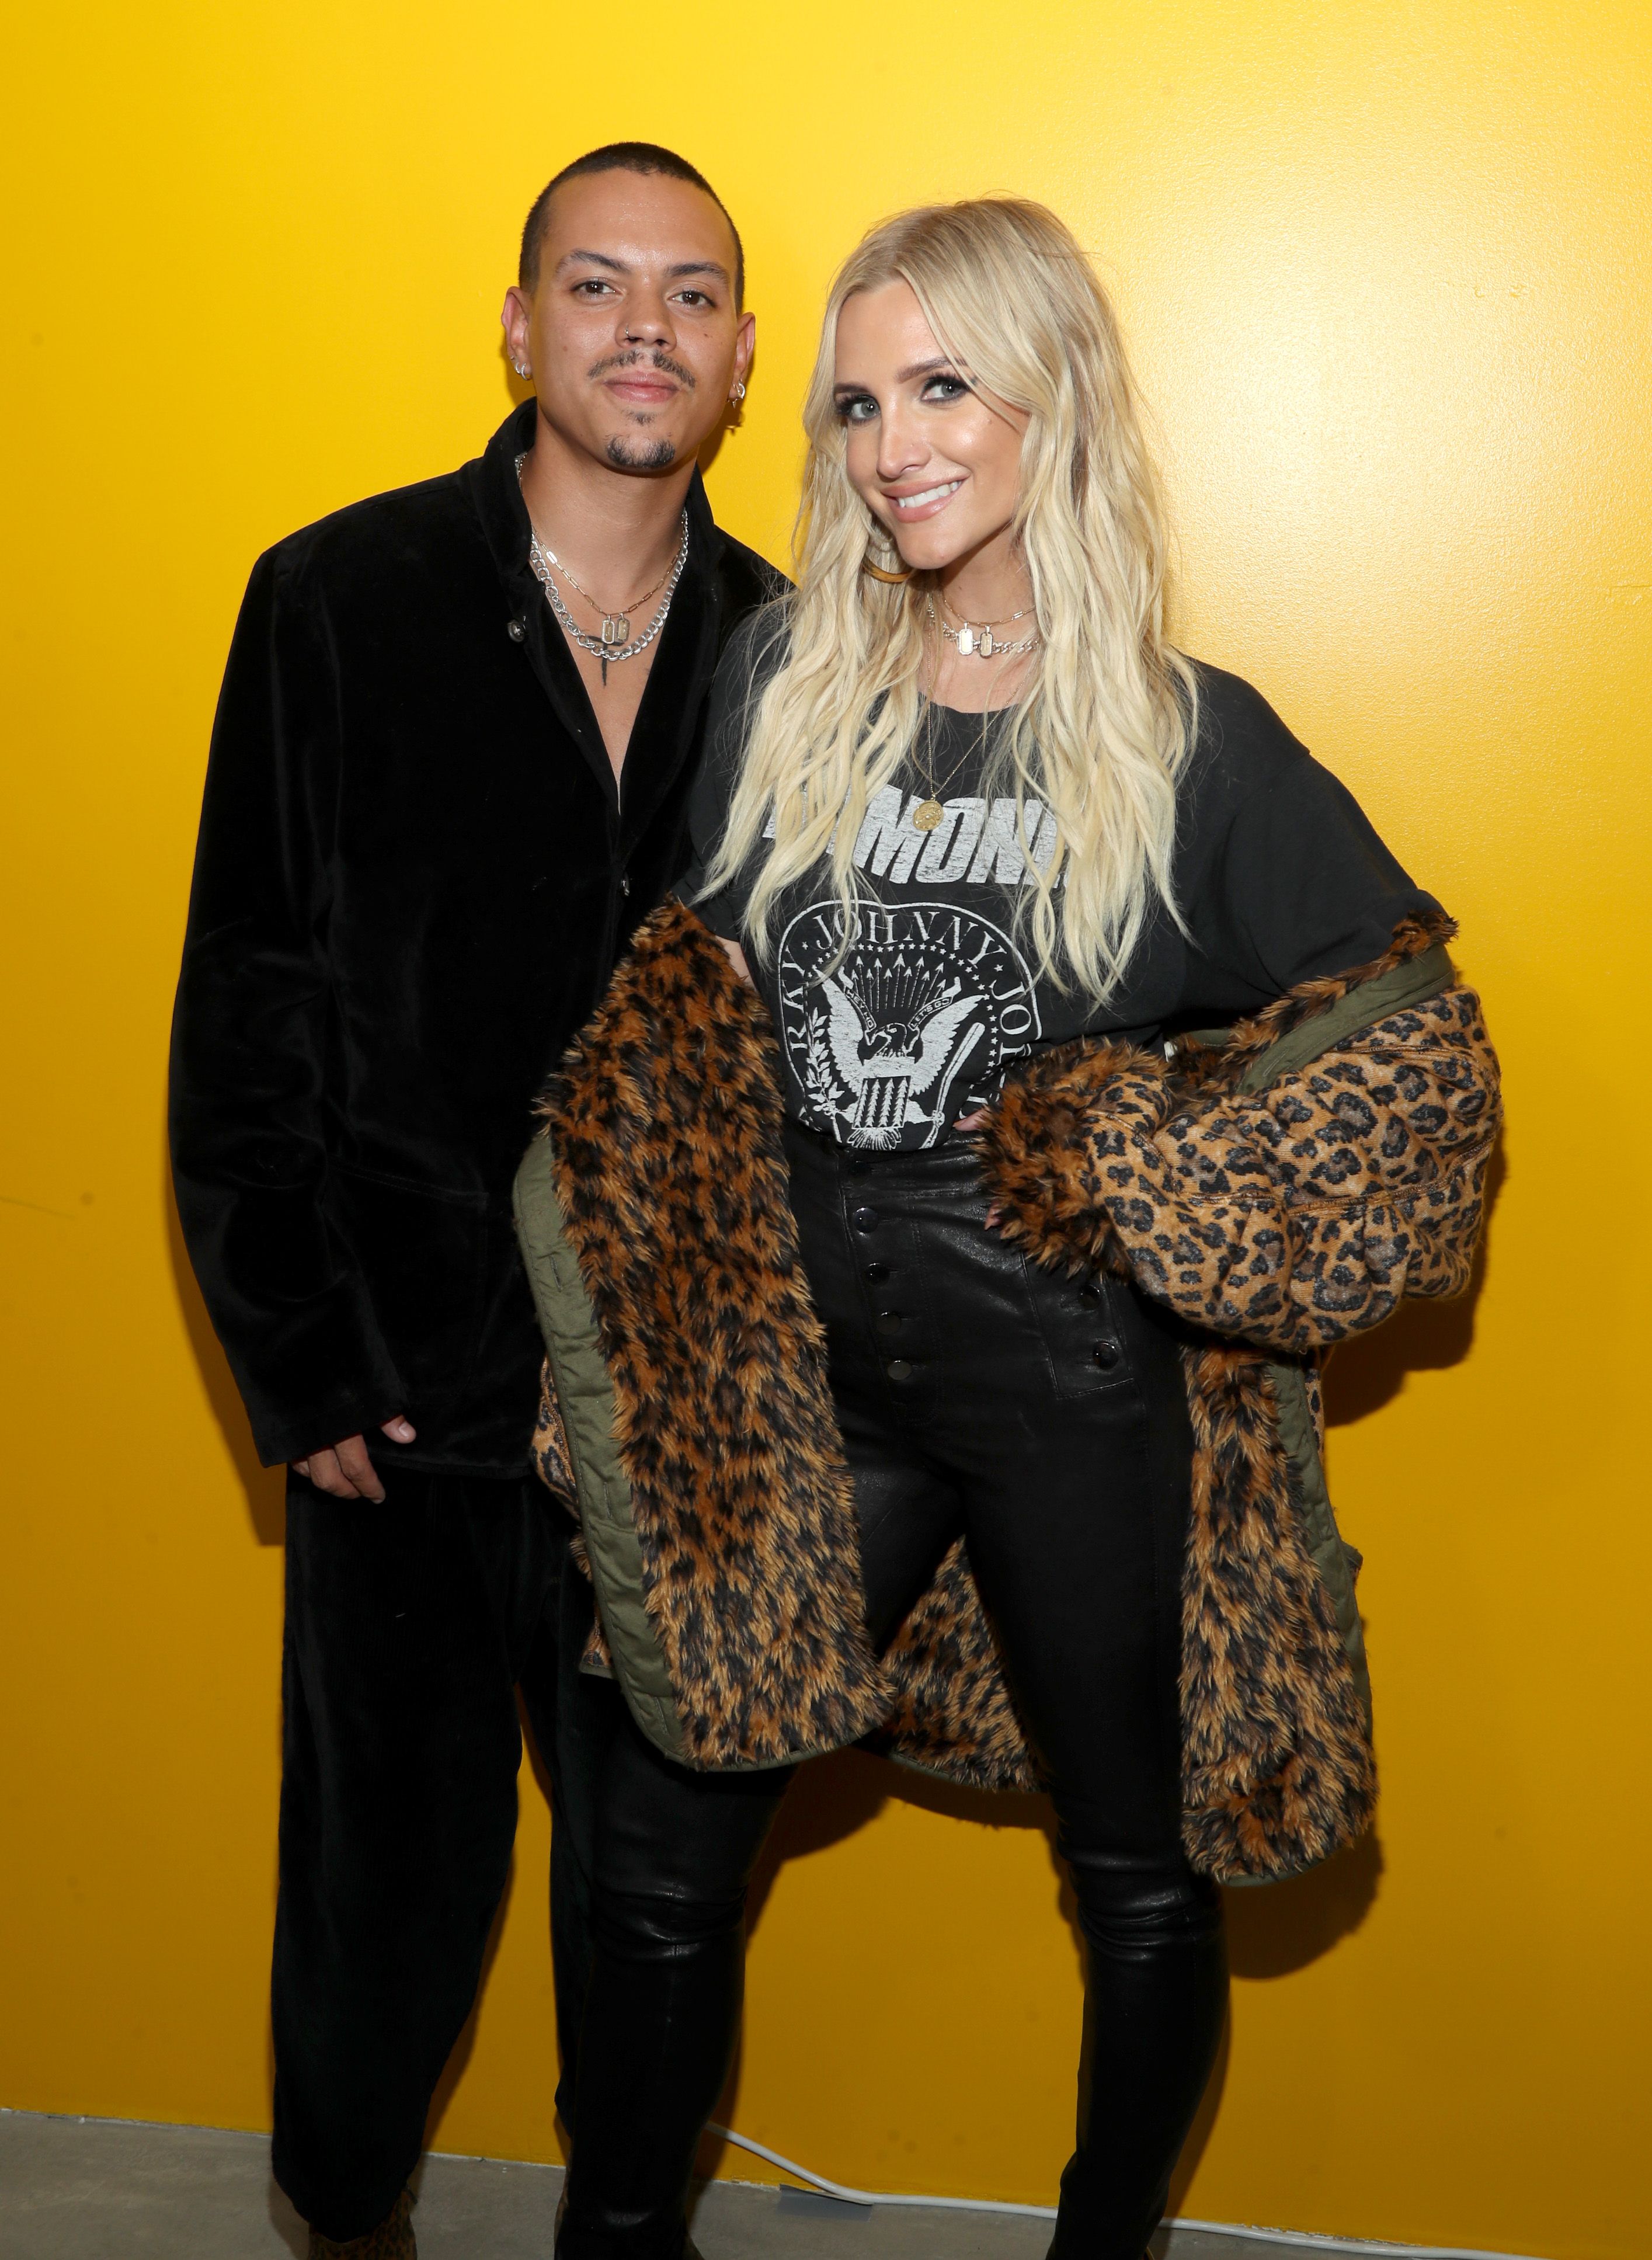 Ashlee Simpson Ross  and husband Evan Ross at the Talent Resources Presents Airgraft's "The Art Of Clean Vapor" in 2019 in Los Angeles, California | Source: Getty Images